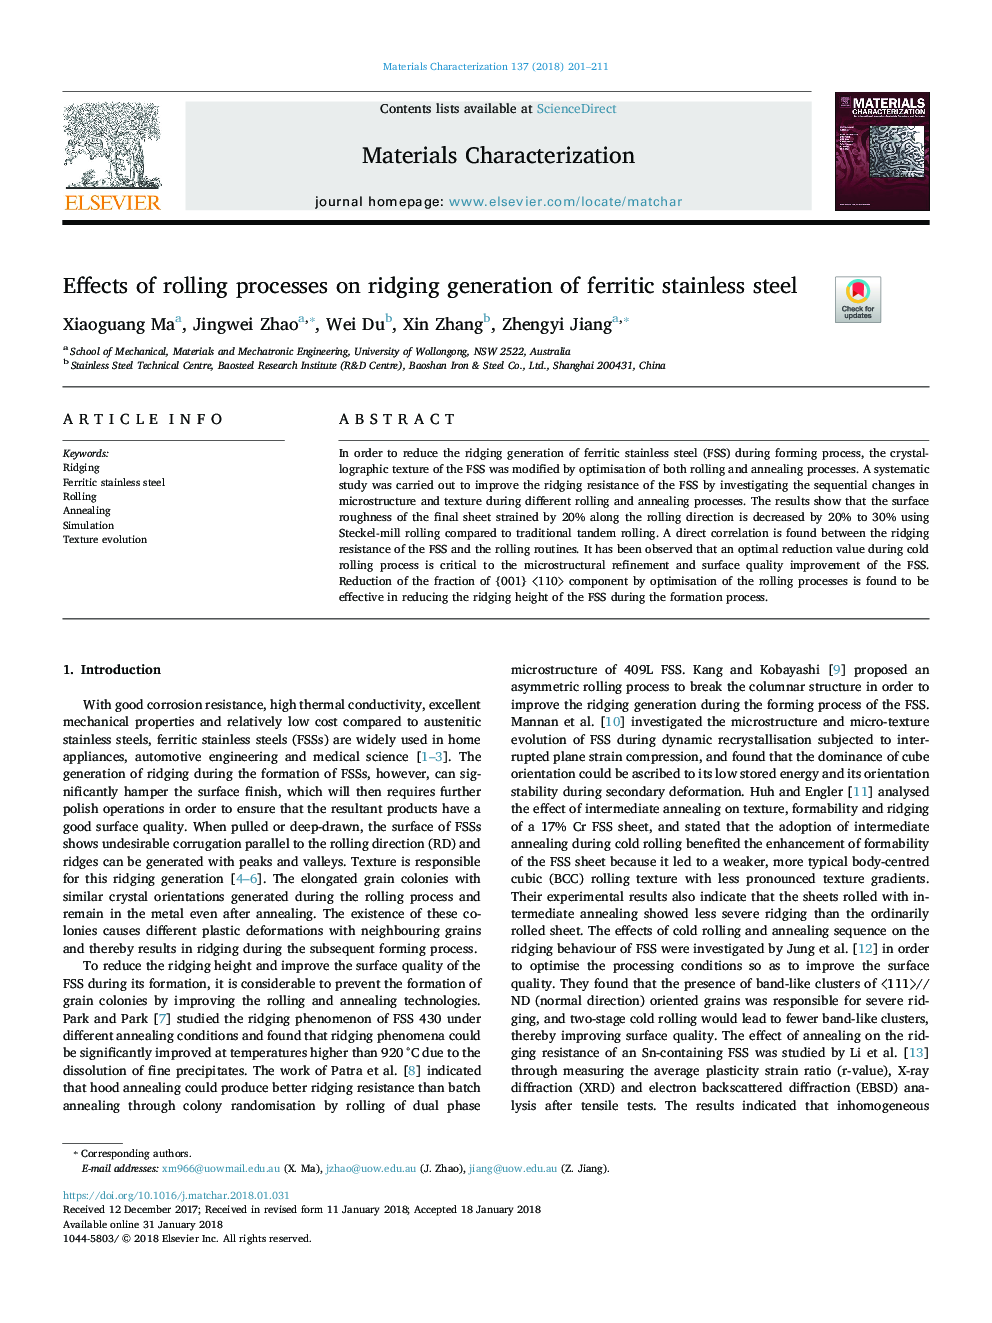 Effects of rolling processes on ridging generation of ferritic stainless steel